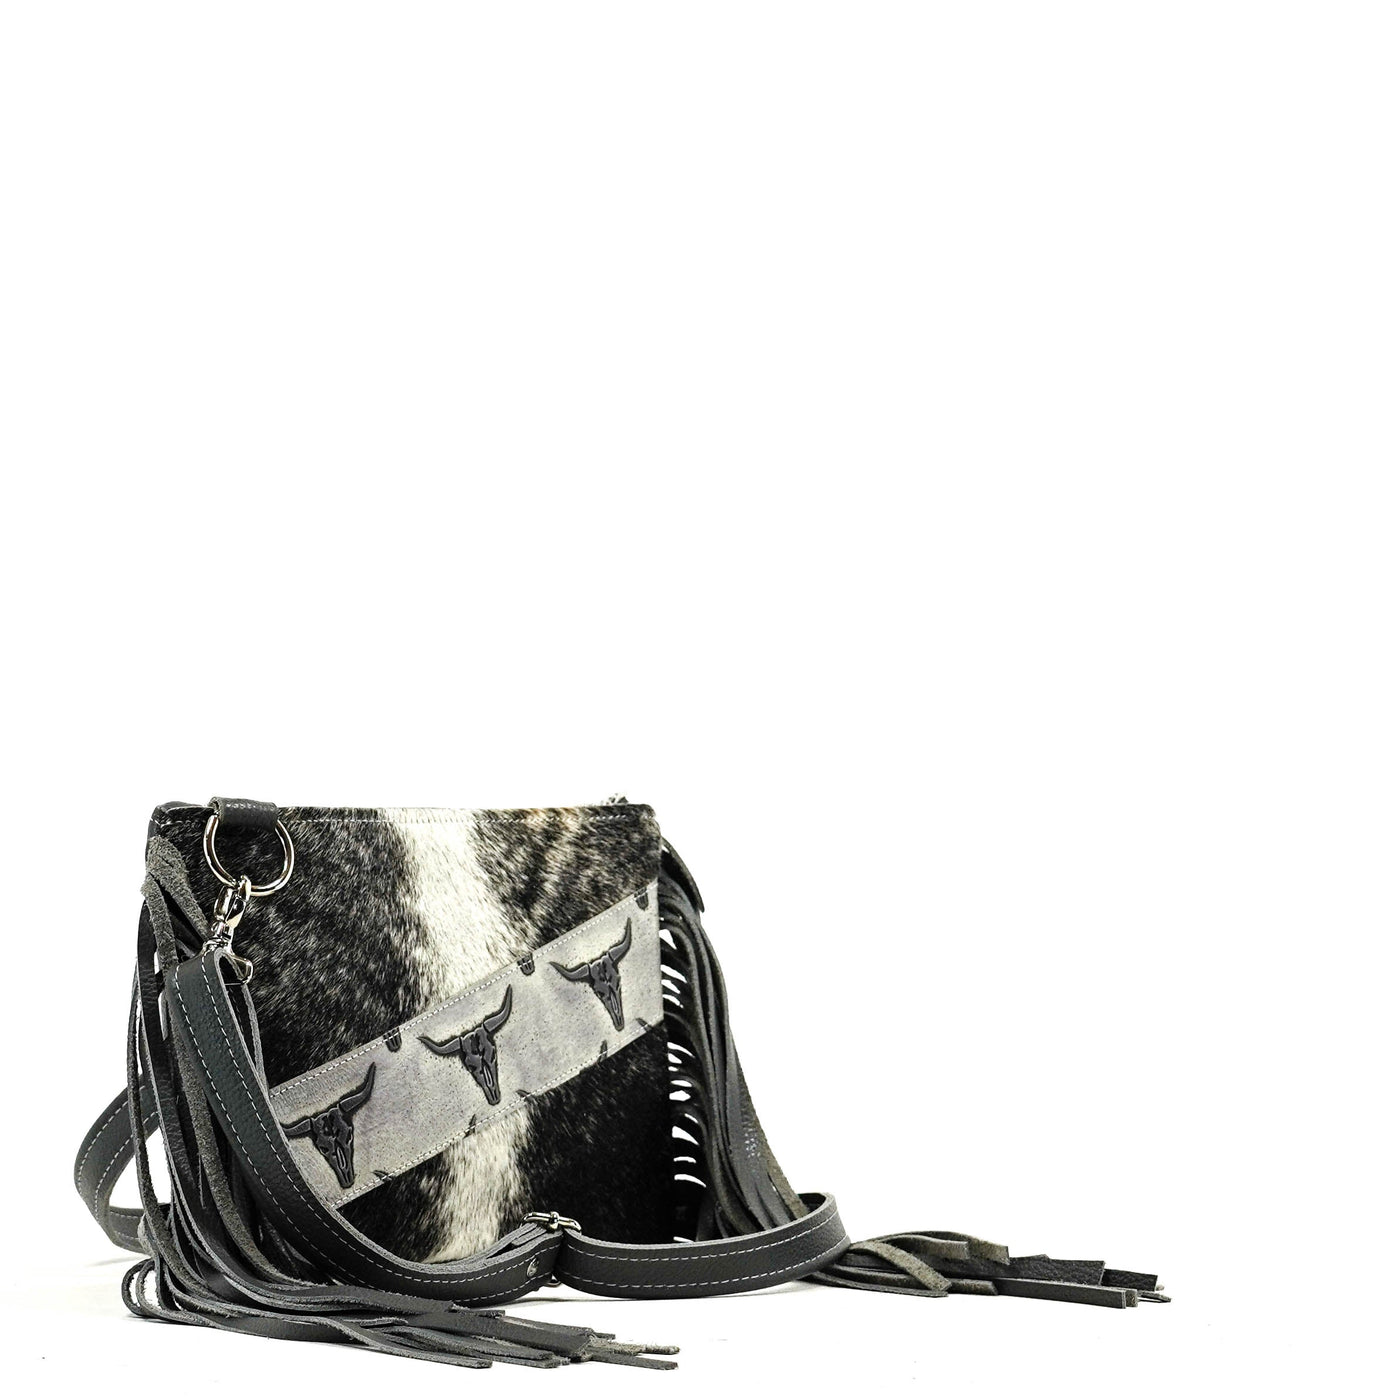 Patsy - Centered Brindle w/ Smoke Show Skulls-Patsy-Western-Cowhide-Bags-Handmade-Products-Gifts-Dancing Cactus Designs